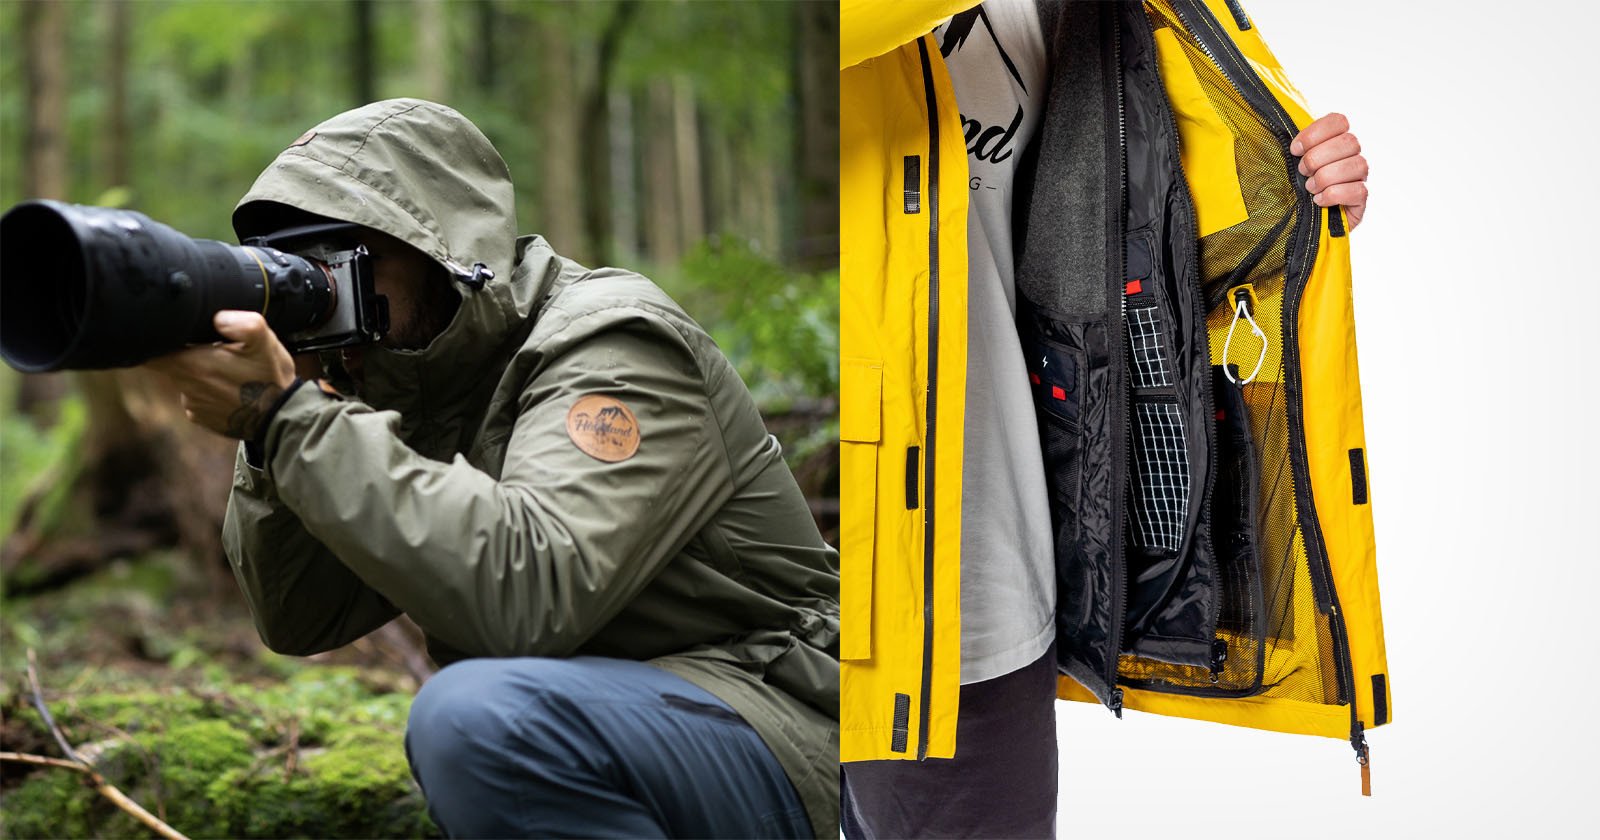 Hauklands 7in1 Jacket is Made Specifically for Photographers